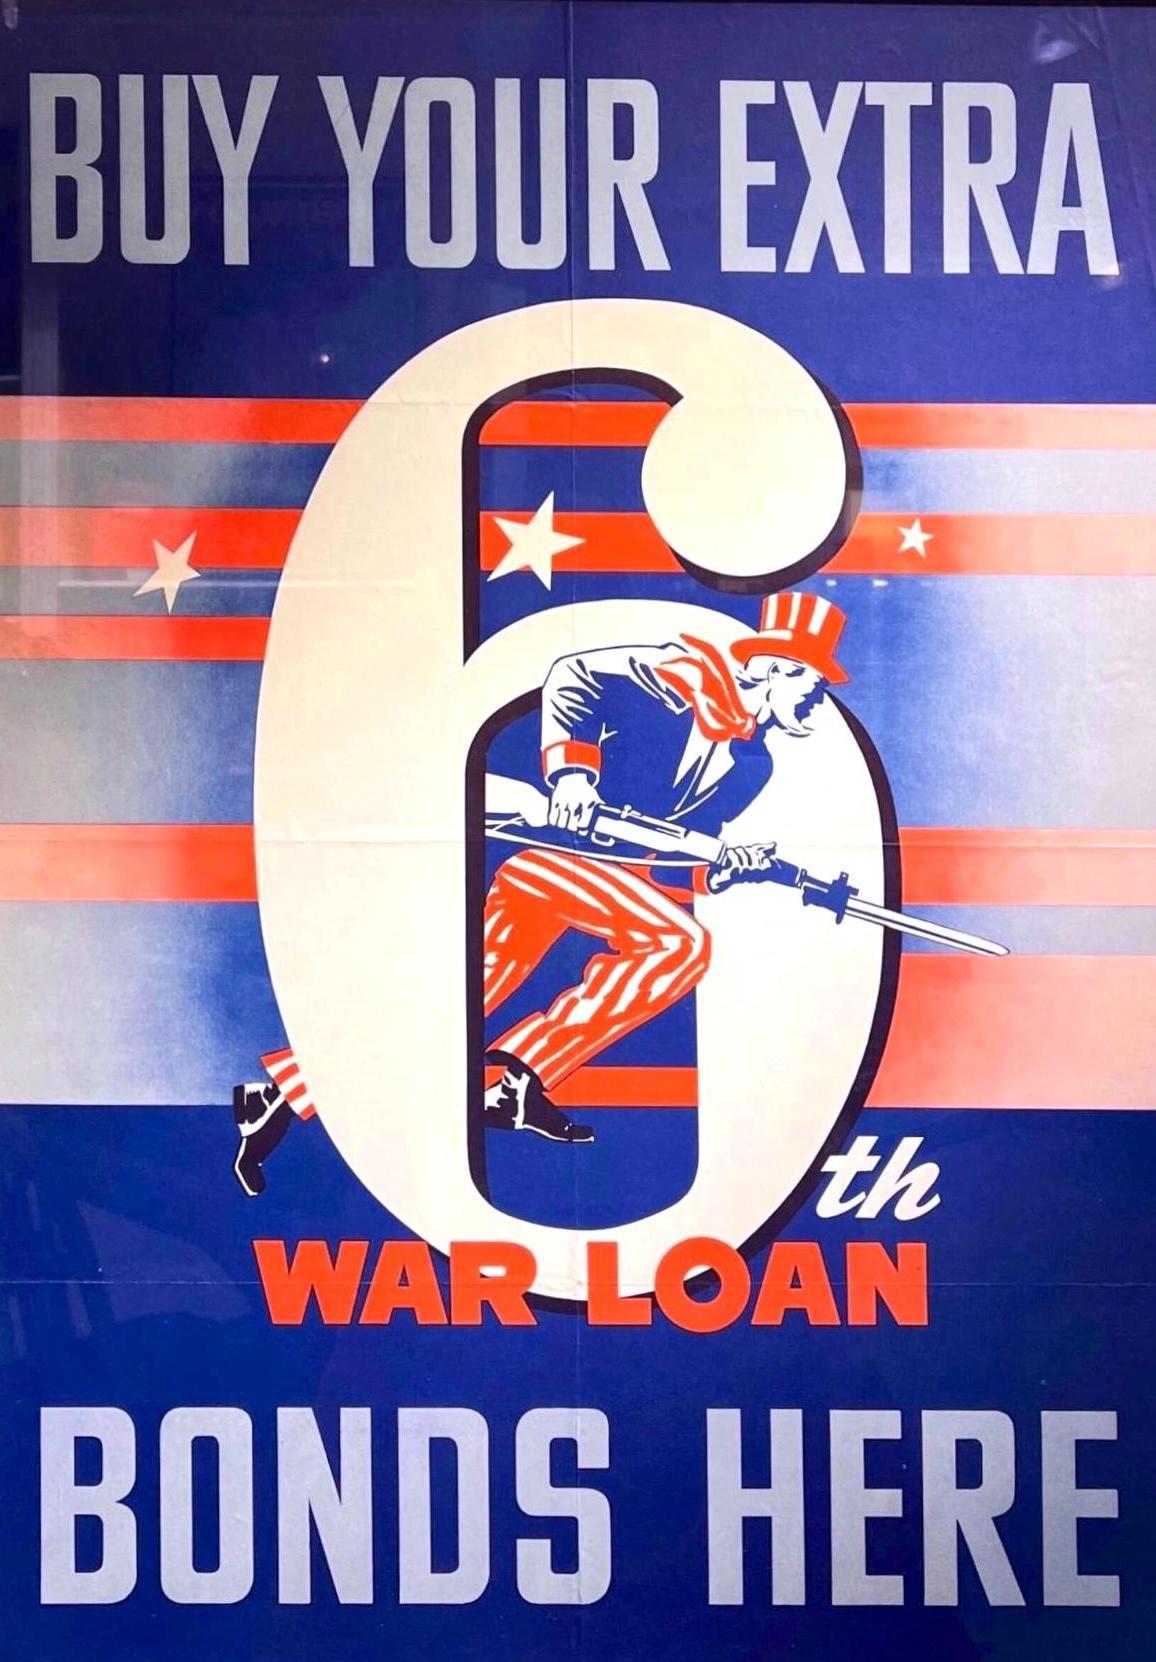 This is an original World War II poster, dating to 1944. The poster reads 